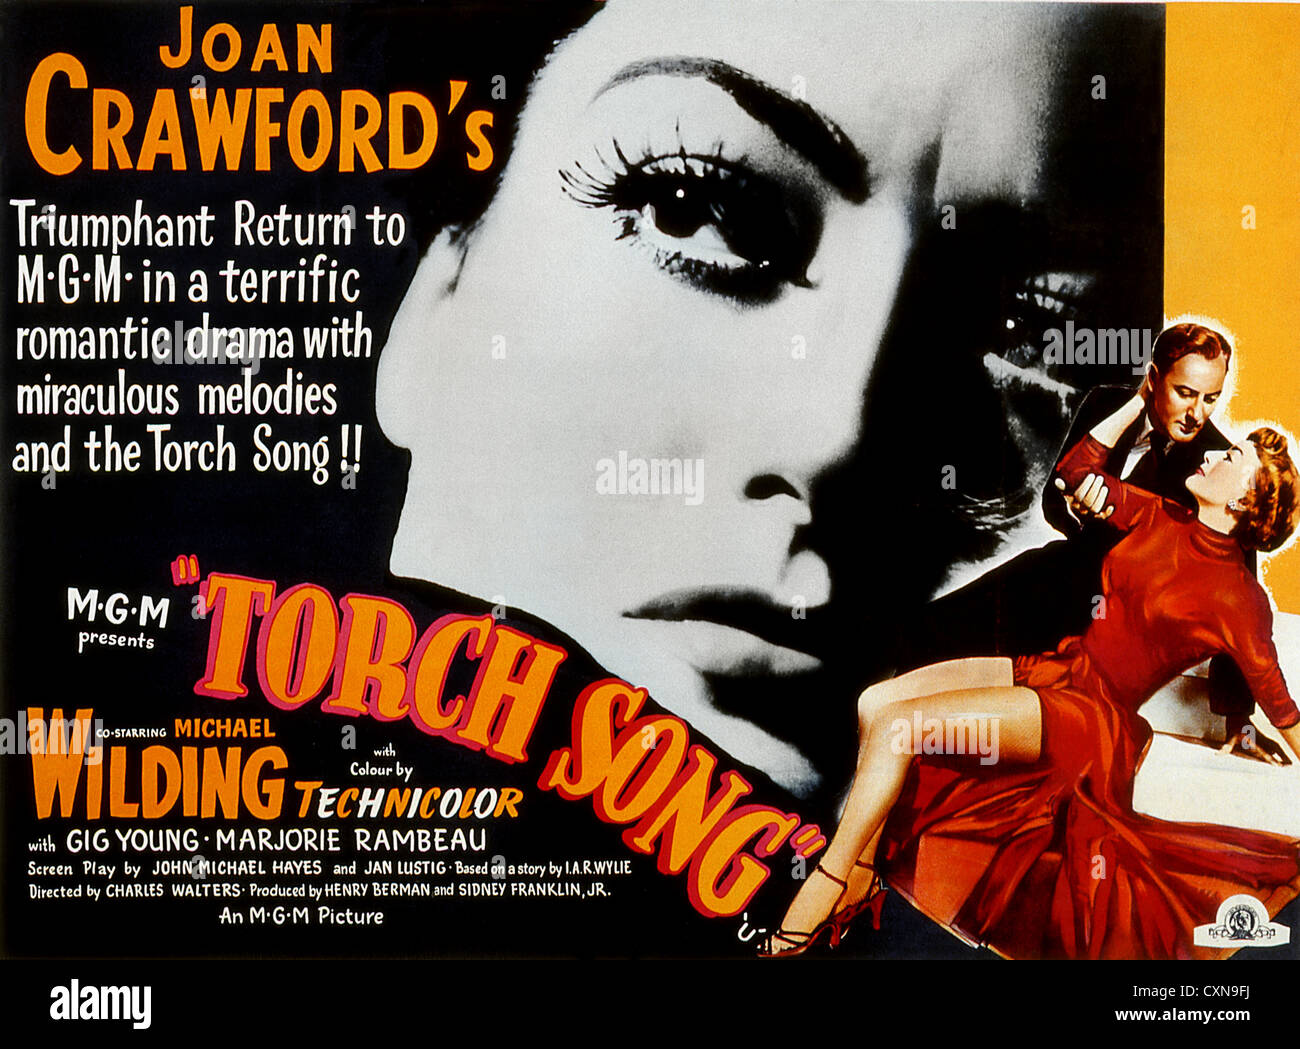 TORCH SONG (1953) POSTER JOAN CRAWFORD CHARLES WALTERS (DIR) TSNG 002 MOVIESTORE COLLECTION LTD Stock Photo